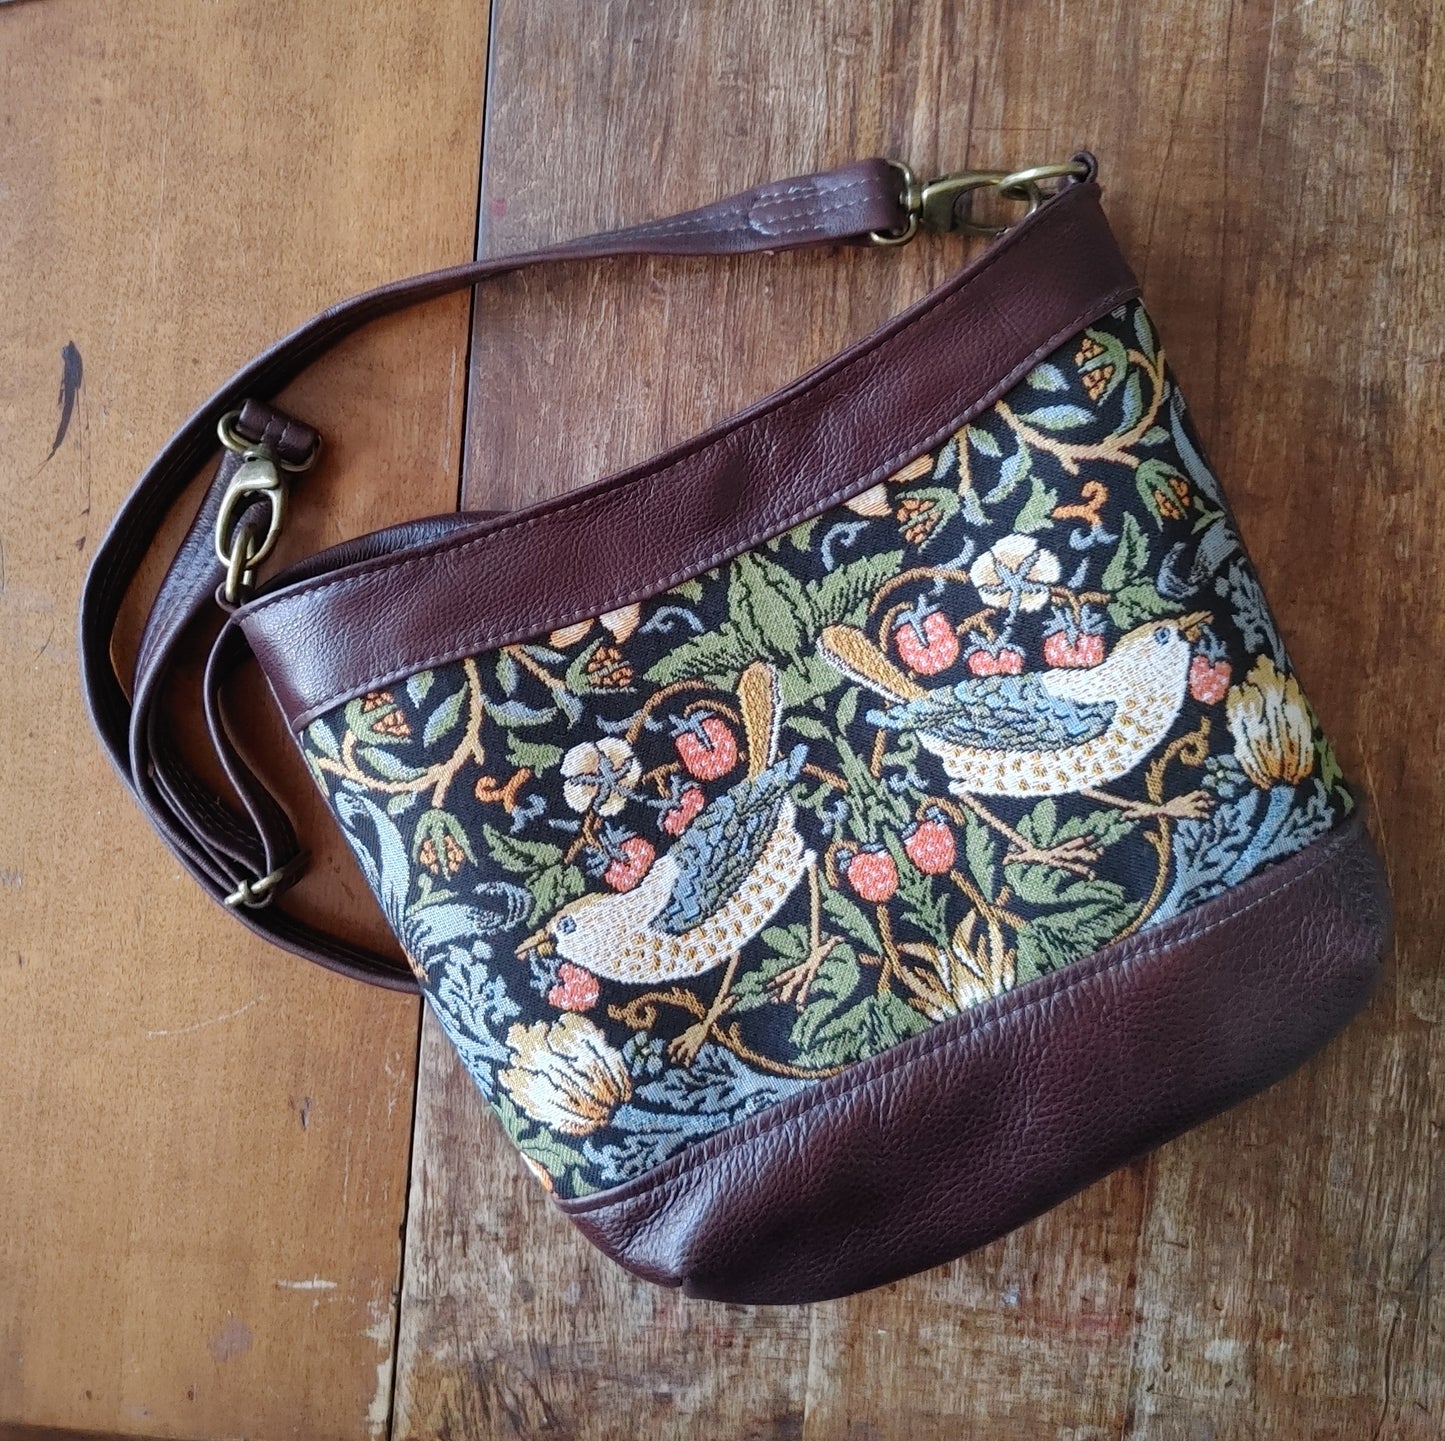 Sway Handbag in Leather and Strawberry Thief